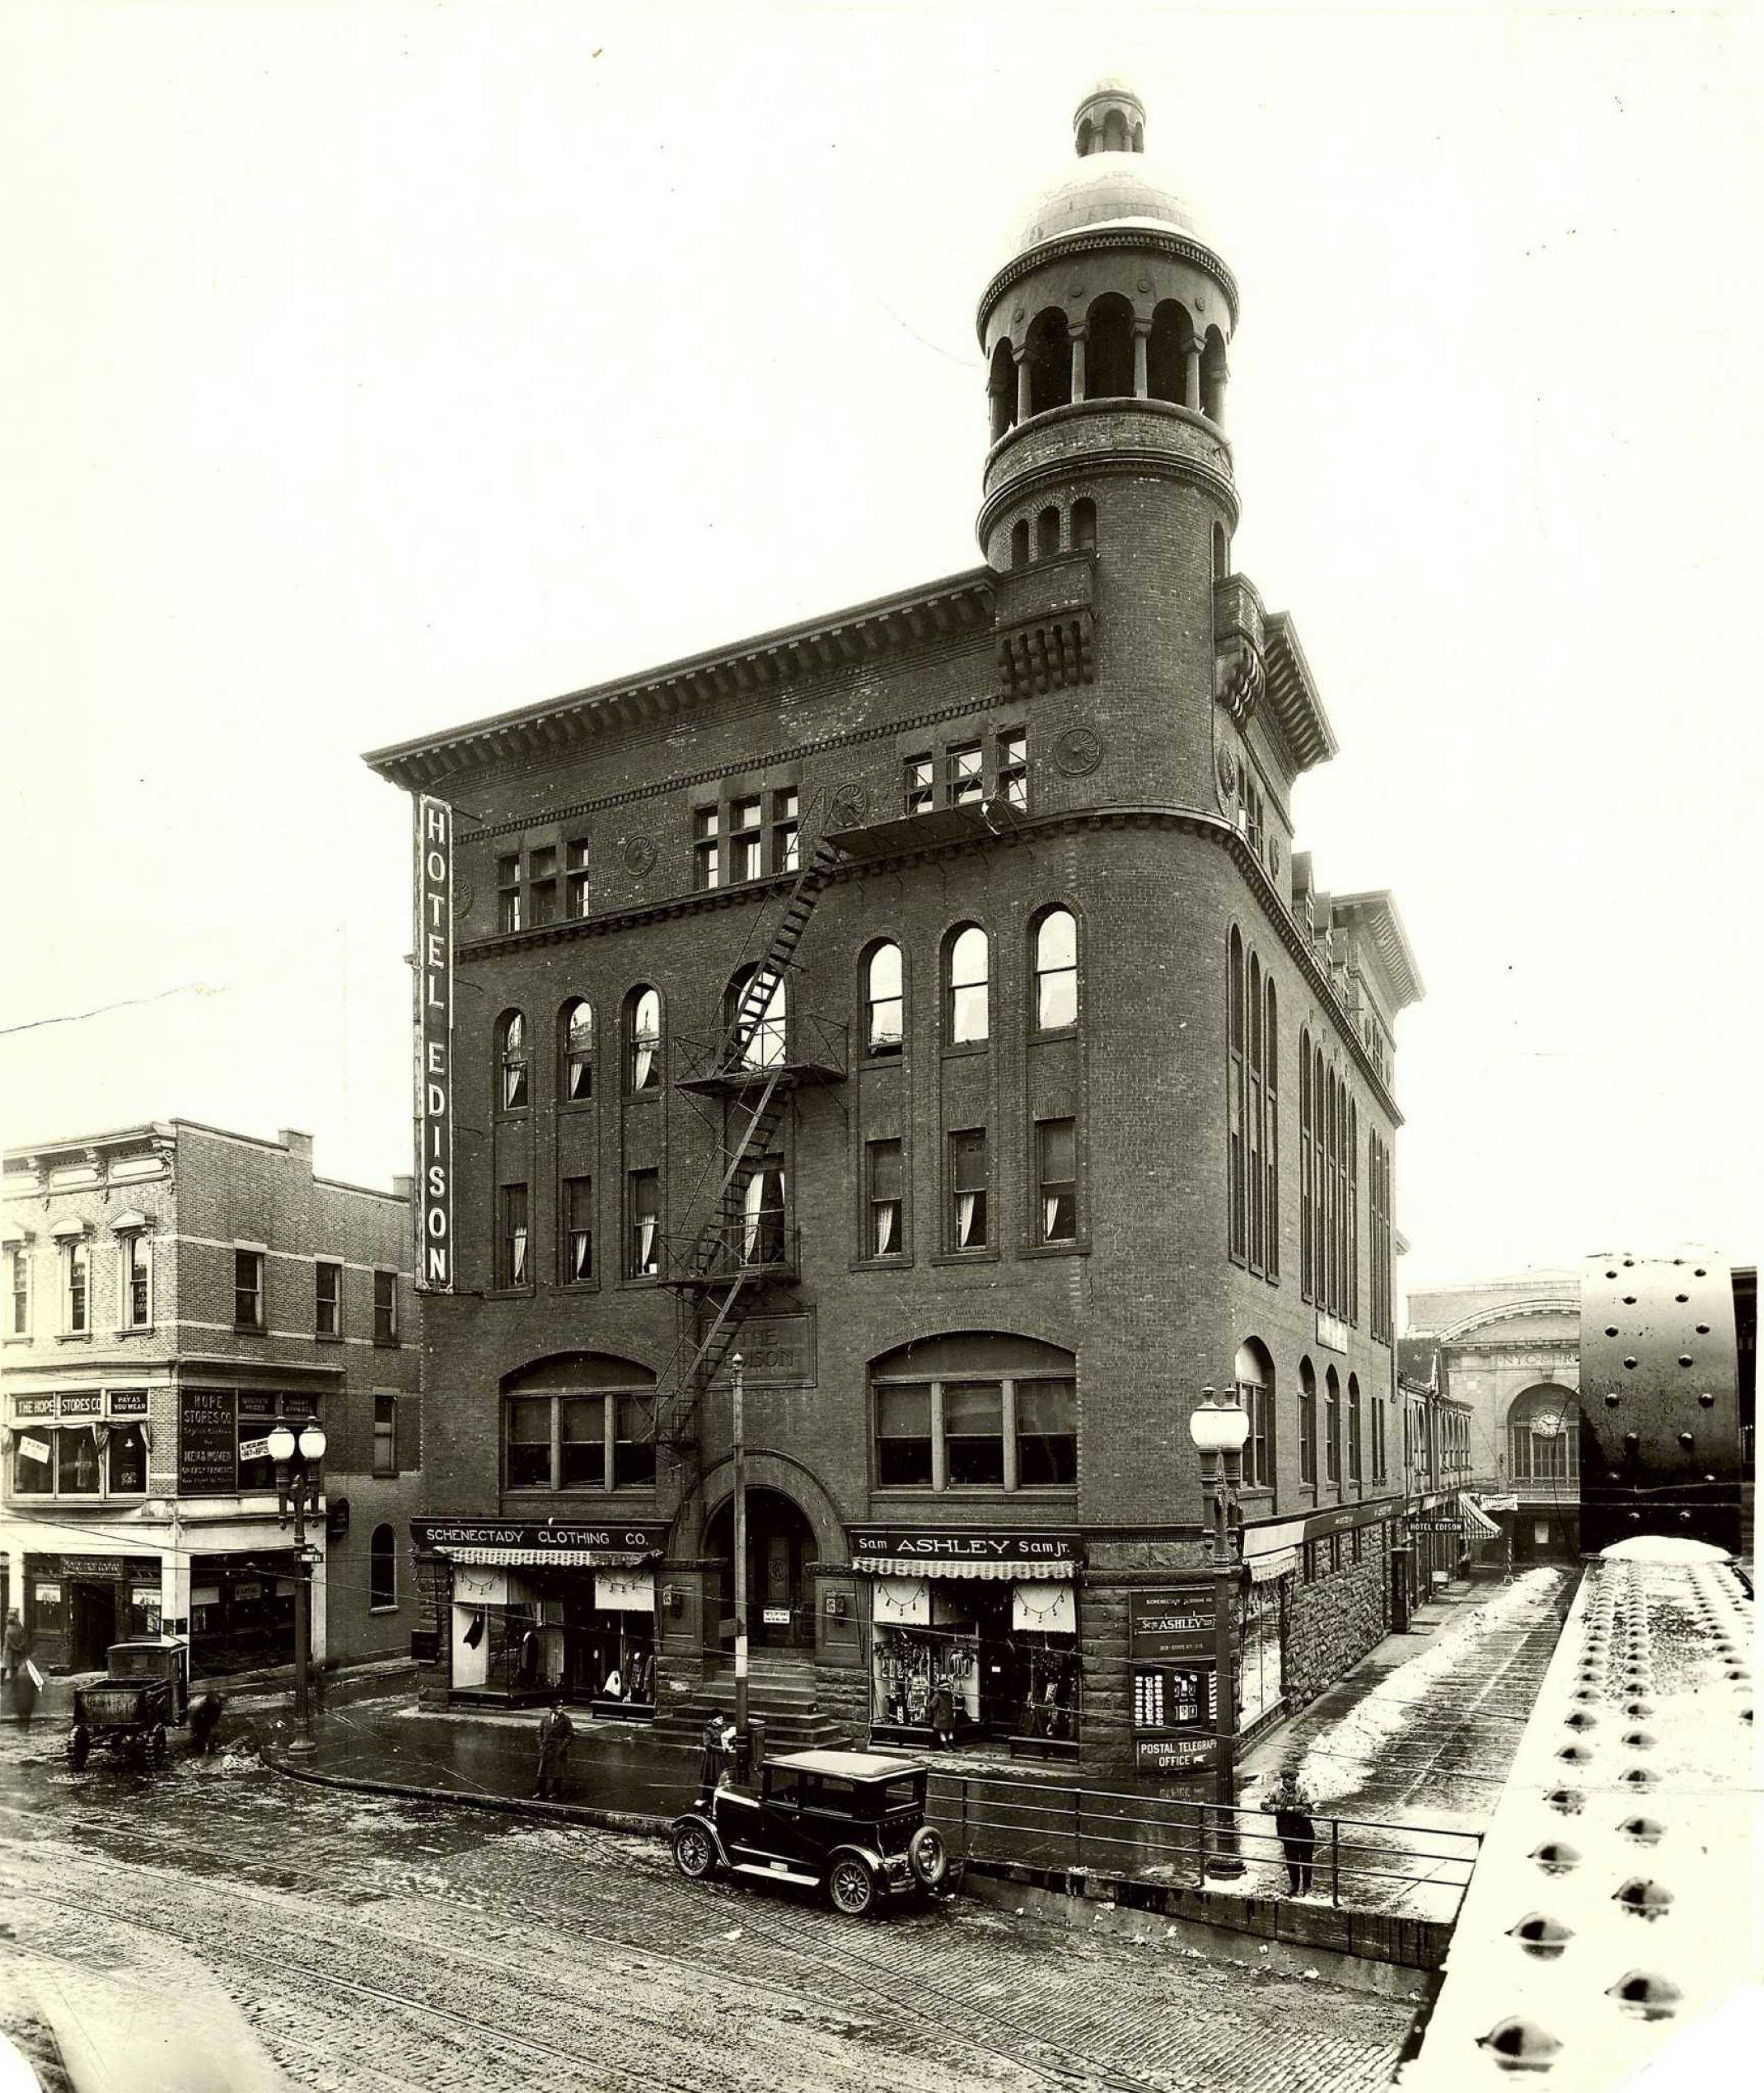 The Edison Hotel, State and Wall Streets, Schenectady